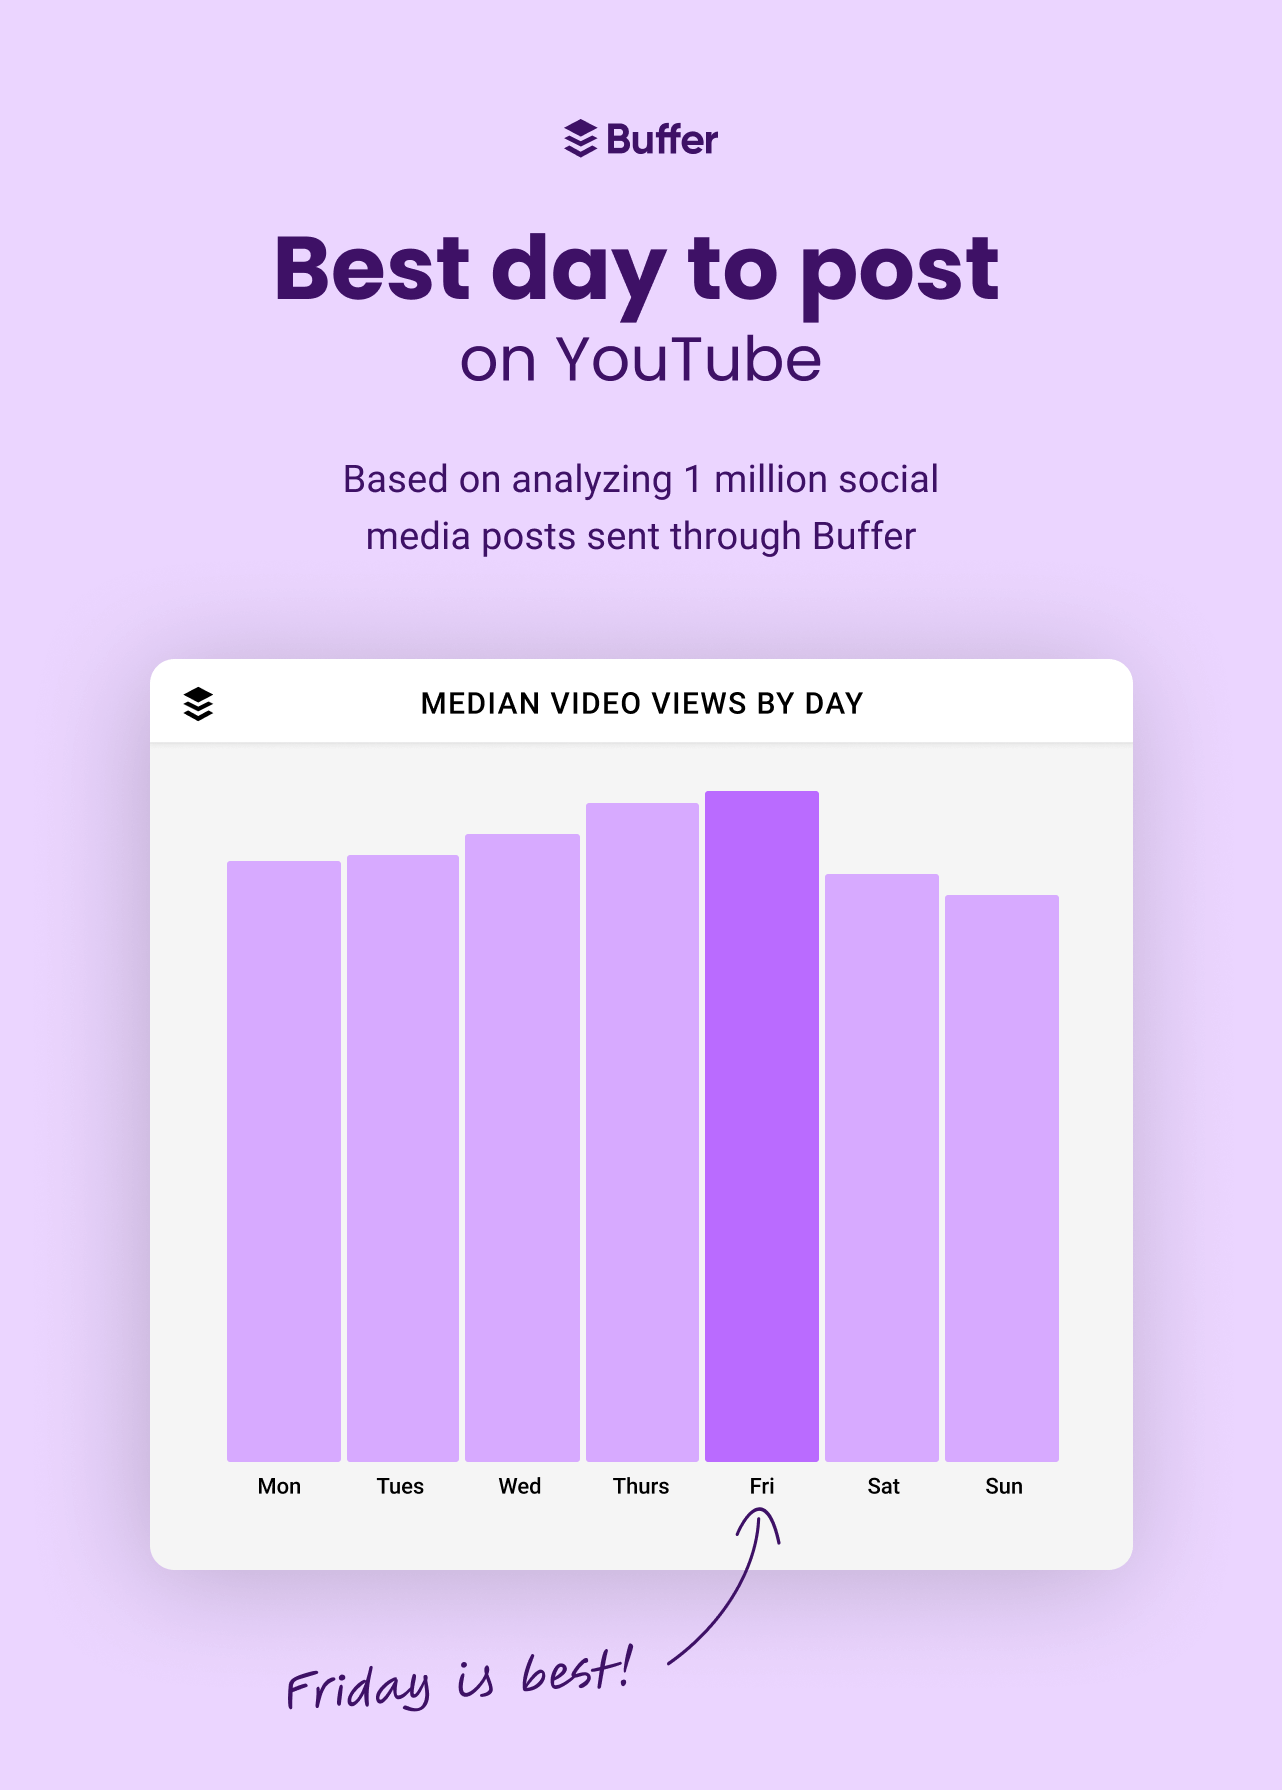 A graph showing the best day of the week to post on YouTube.